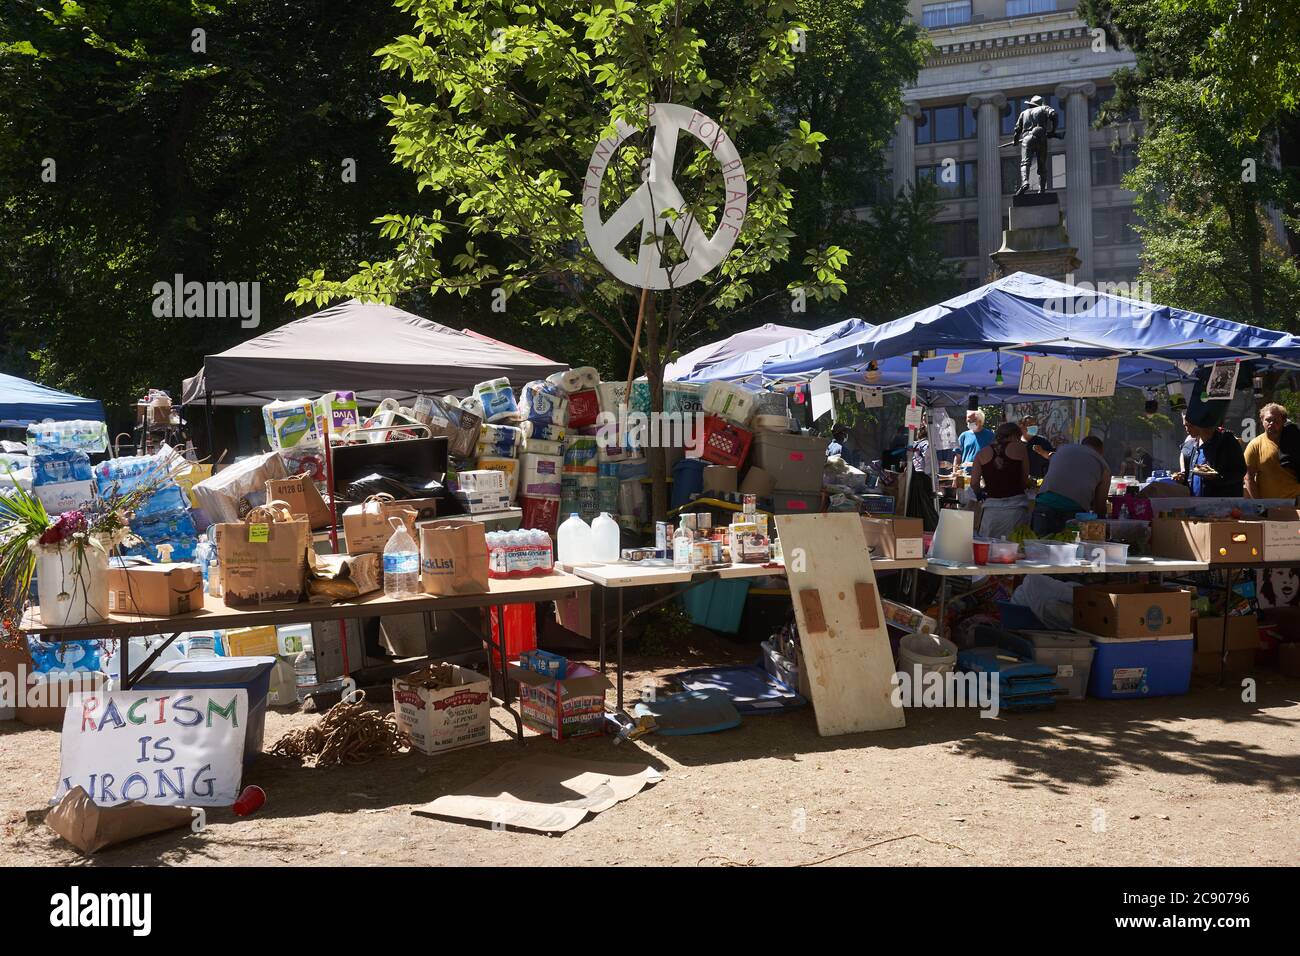 BLM protesters turn the Lownsdale Square, a park adjacent to the federal courthouse in Portland, into their hub amid the ongoing demonstration. Stock Photo